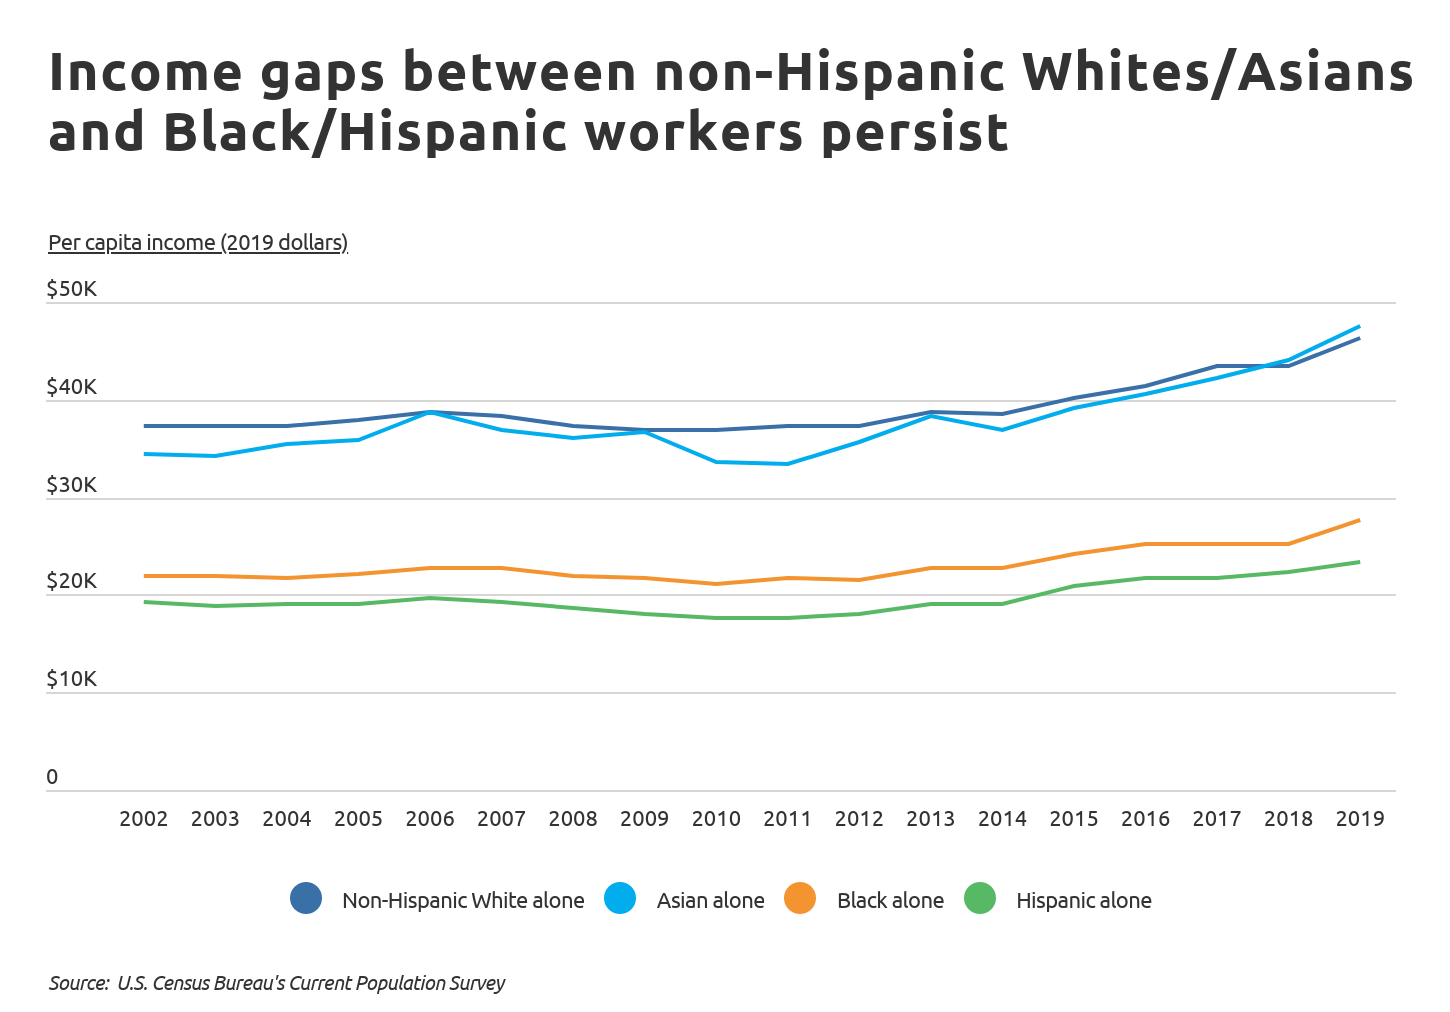 Income gaps between non-Hispanic whites/Asians and Black/Hispanic workers persist